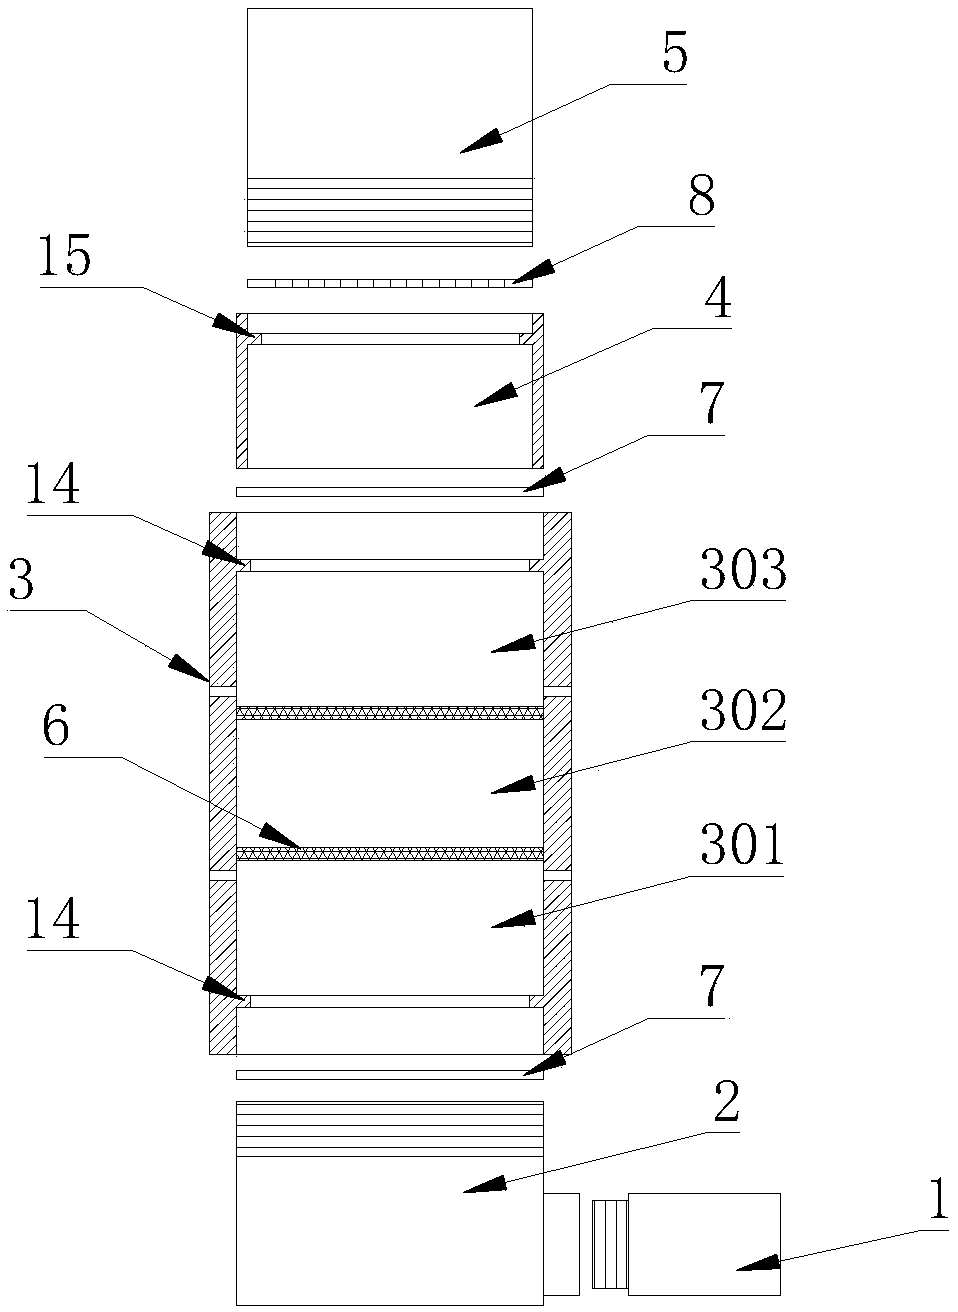 Domestic water purification and multifunction device